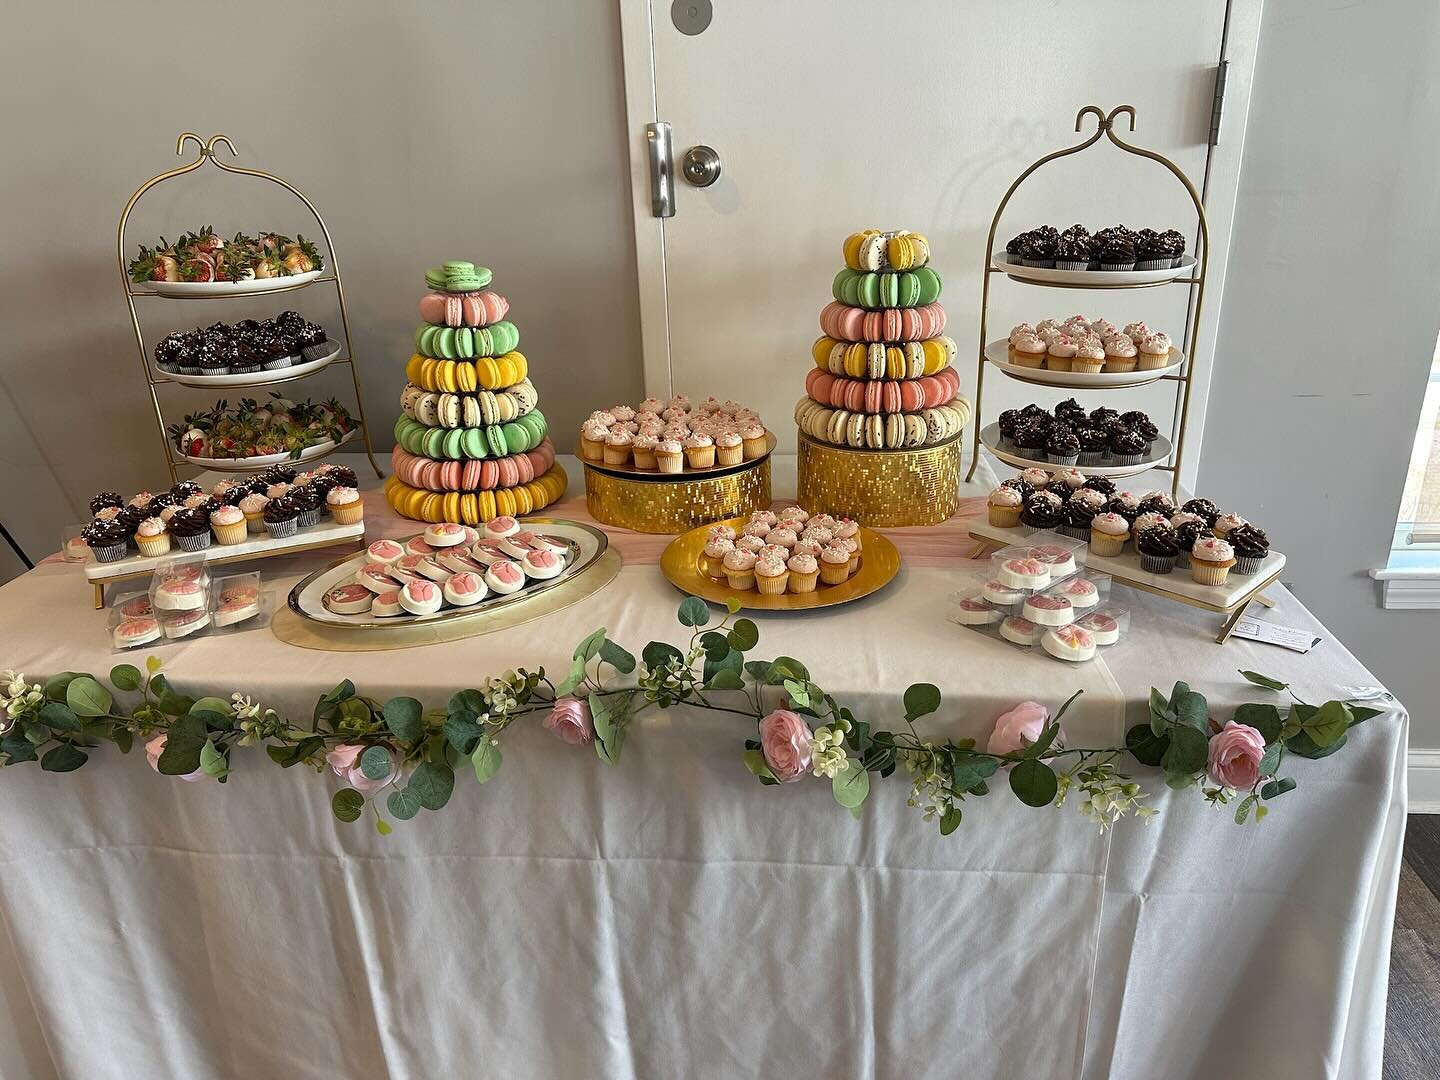 Congrats to the bride to be! @niz1207  had some fun this weekend with the spring themed display of macarons, chocolate covered strawberries, and mini cupcakes. 
 
 
 
 #pastry #bridalshowerdesserts #springdesserts #pastrychefsofboston #macarons #cupc